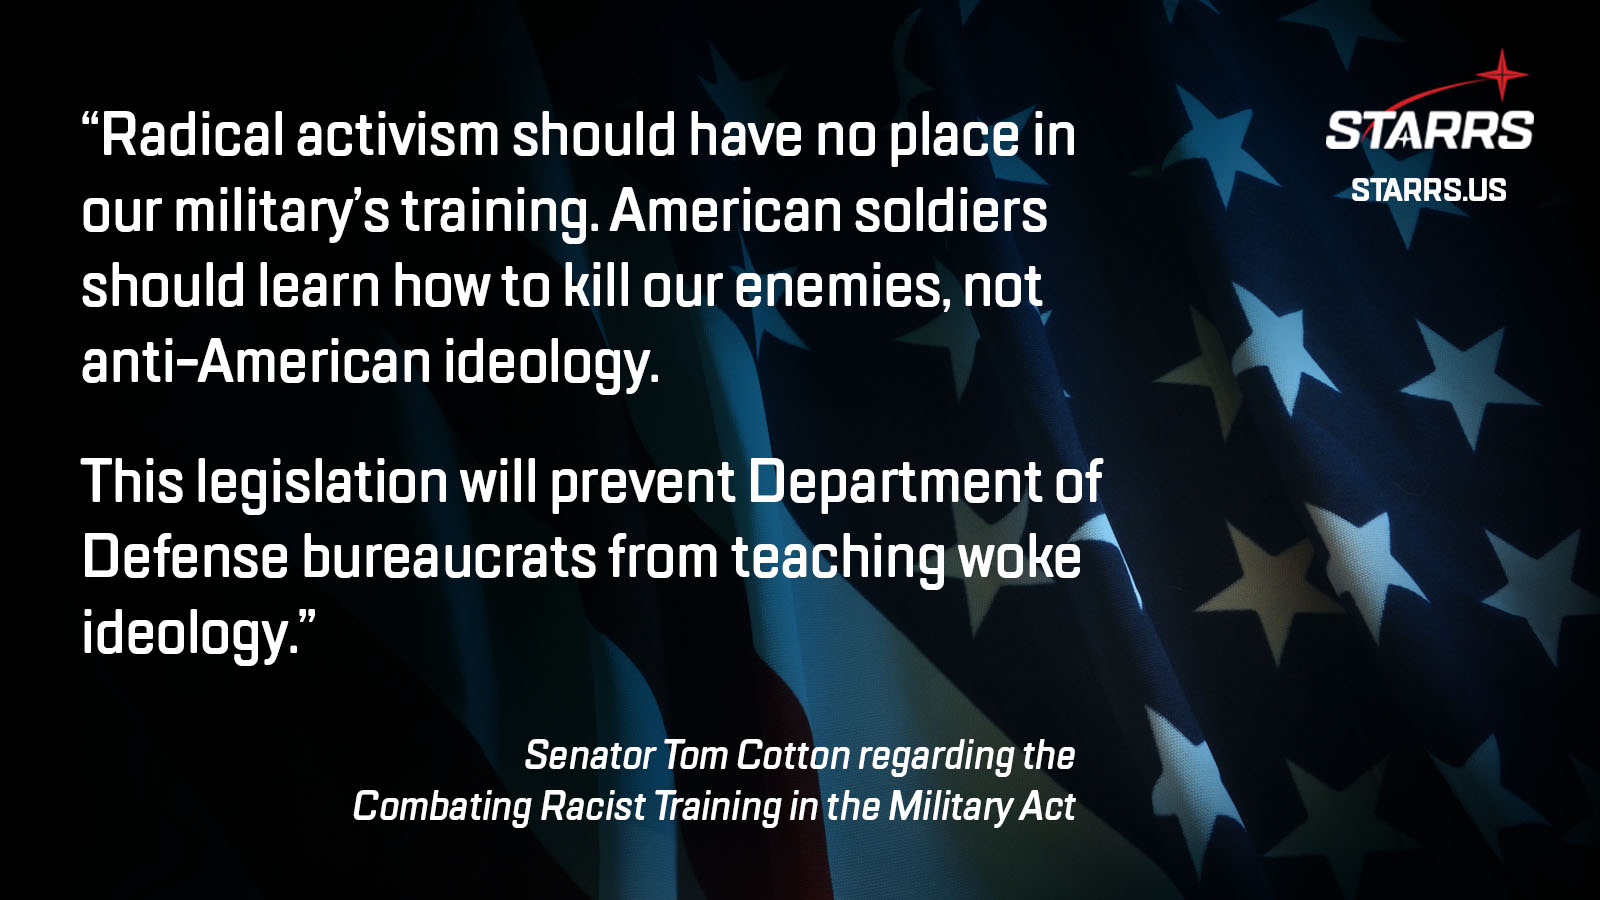 Combatting Racist Training in the Military Act